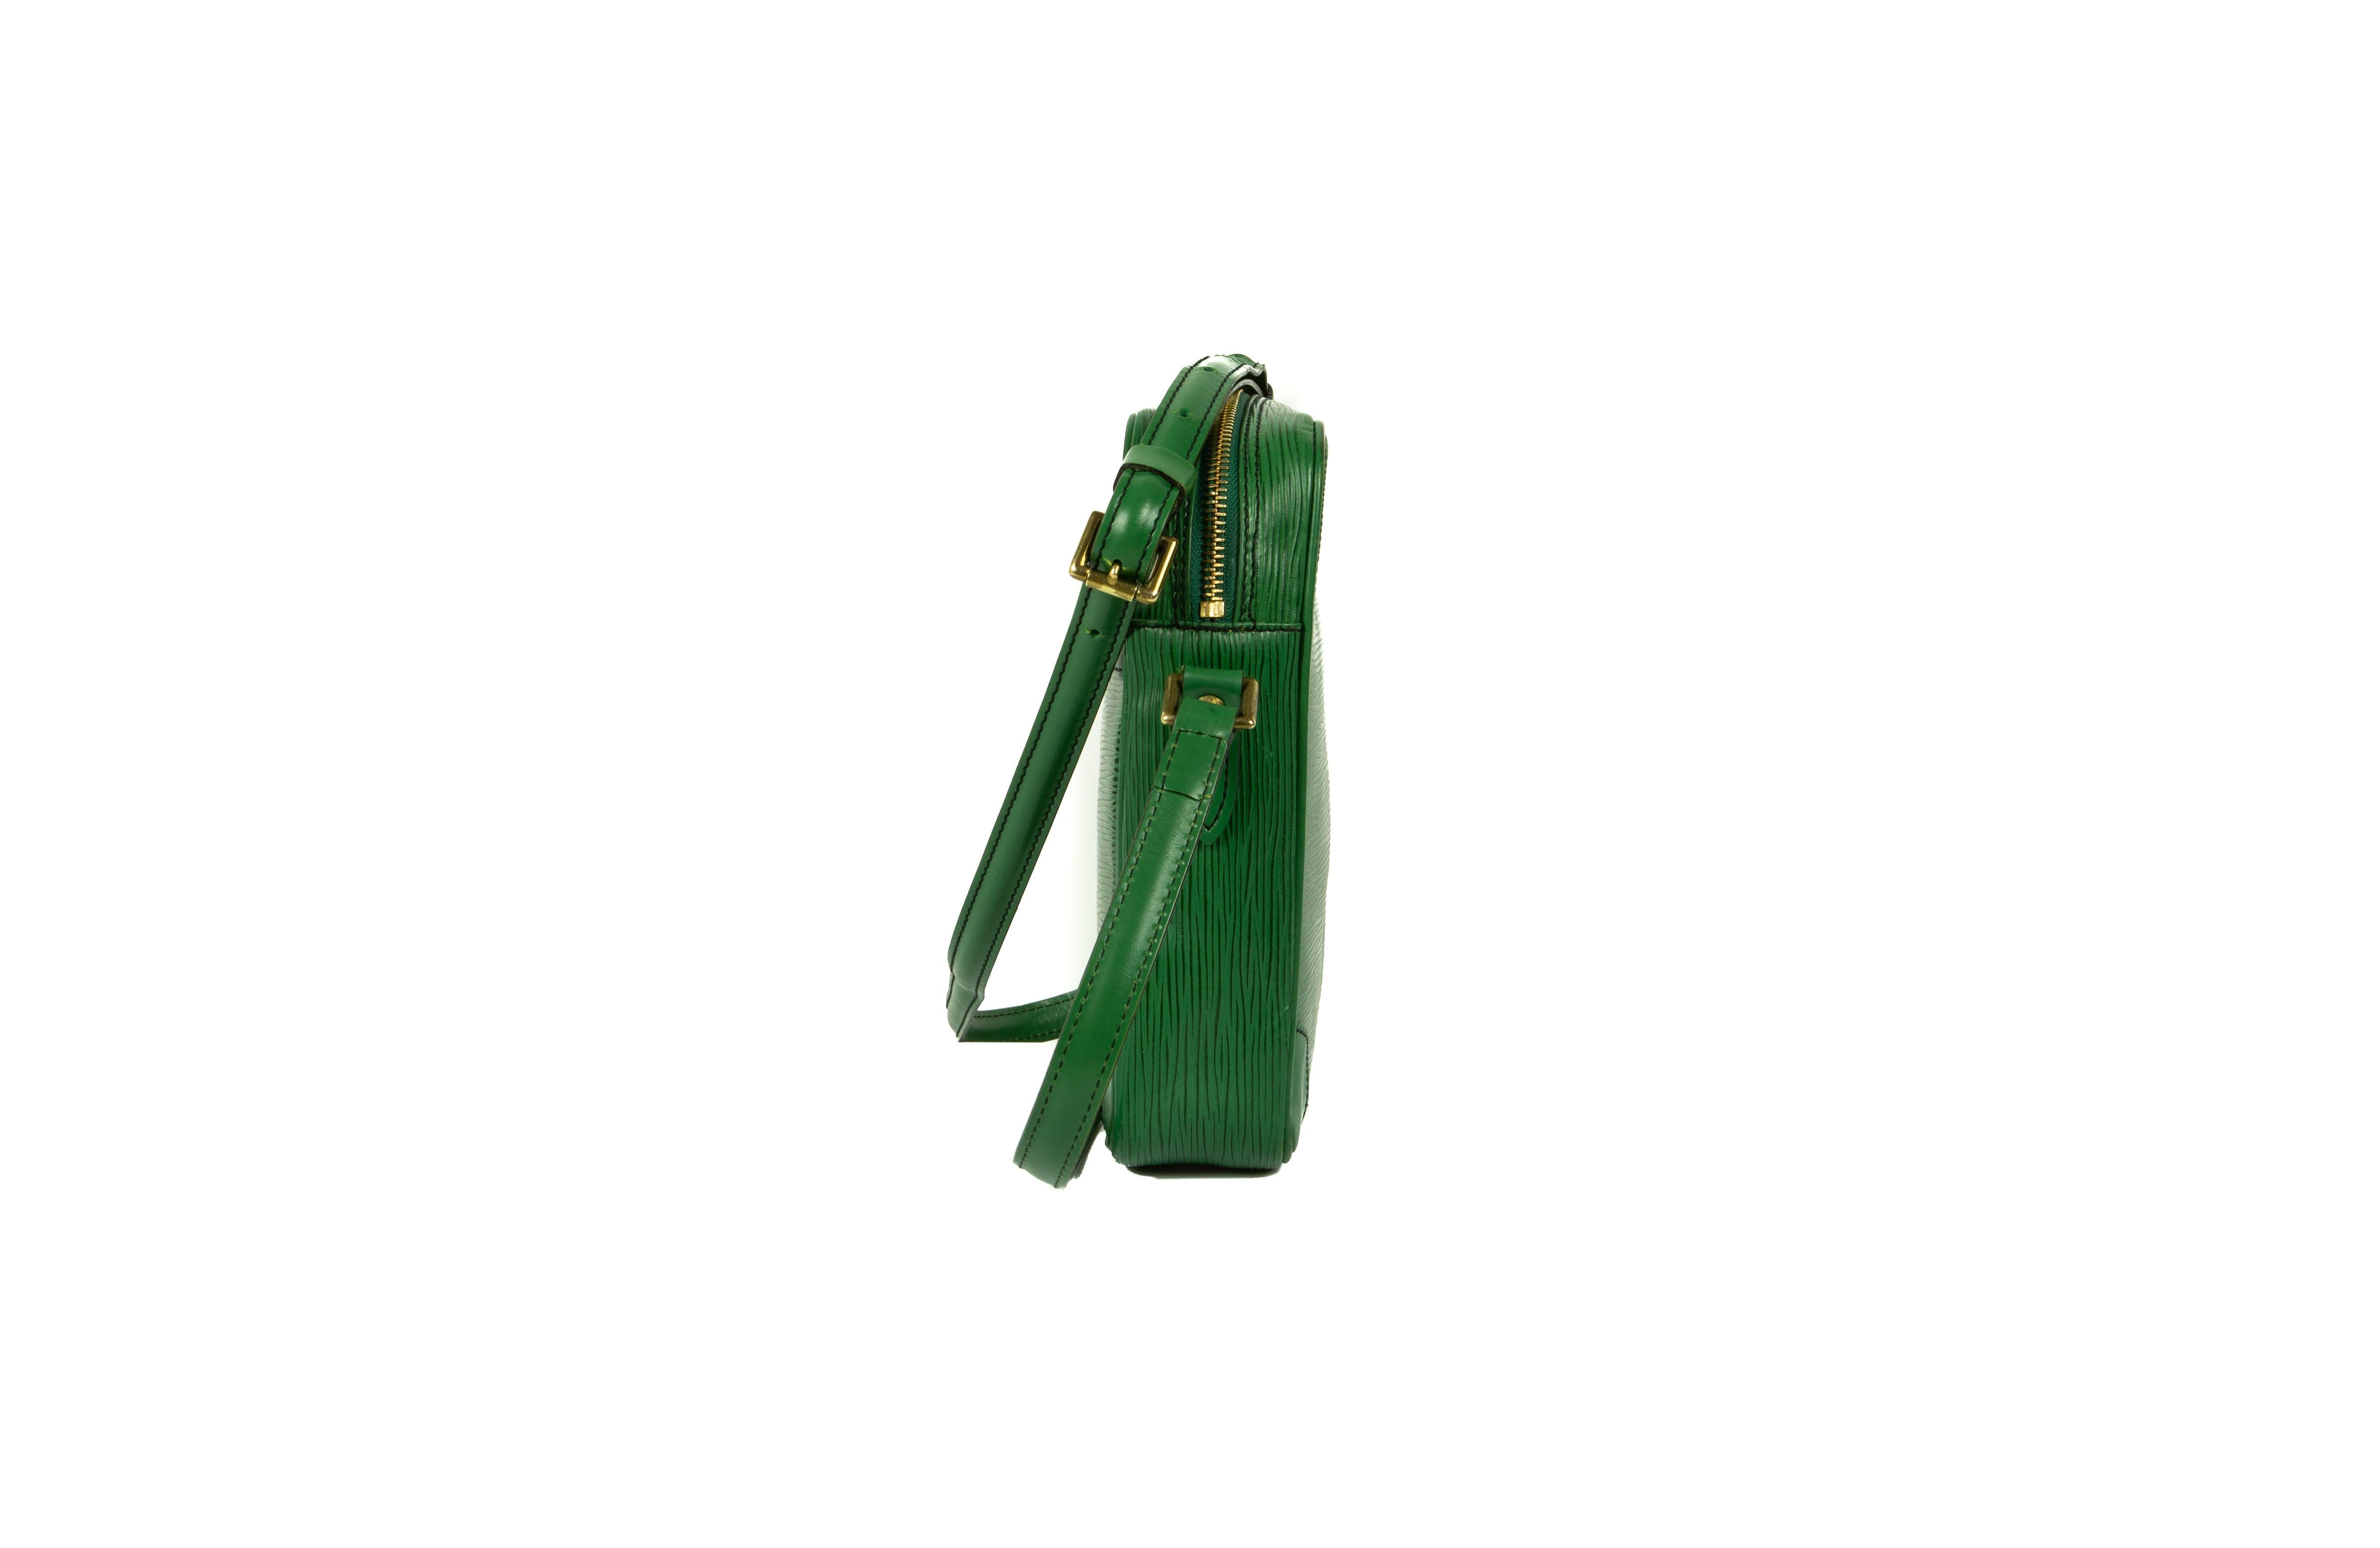 A rare and collectable 1990s Louis Vuitton green Danube cross-body bag, in the iconic Epi leather incorporating an embossed House logo, with polished leather trim throughout, comprising of one compartment with one patch pocket and one outer front